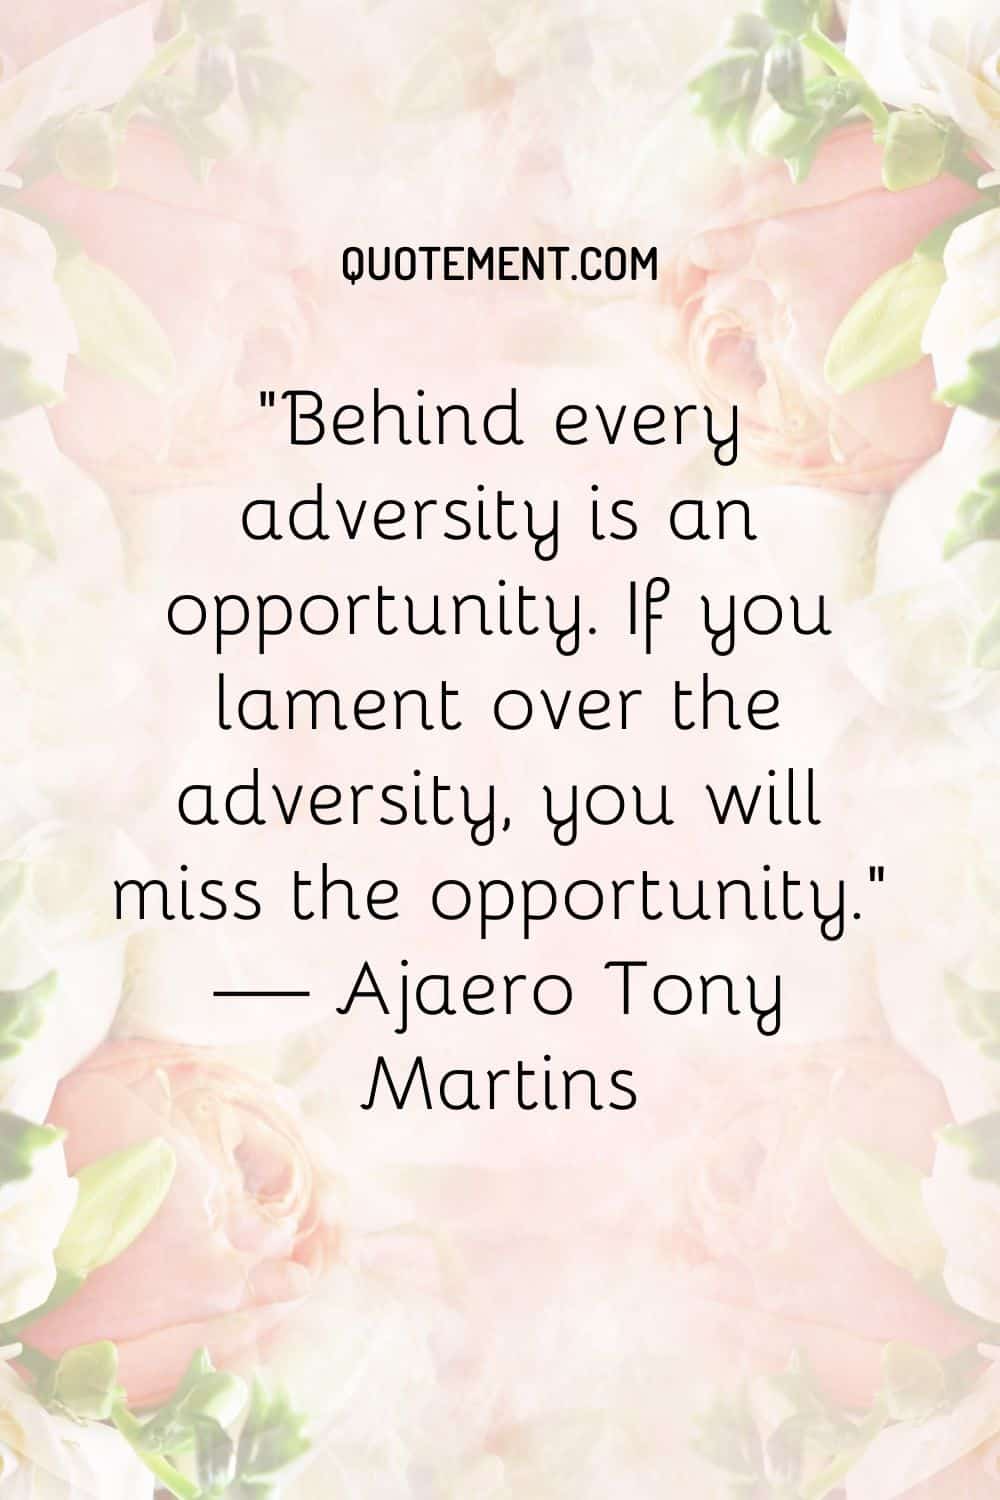 Behind every adversity is an opportunity. If you lament over the adversity, you will miss the opportunity